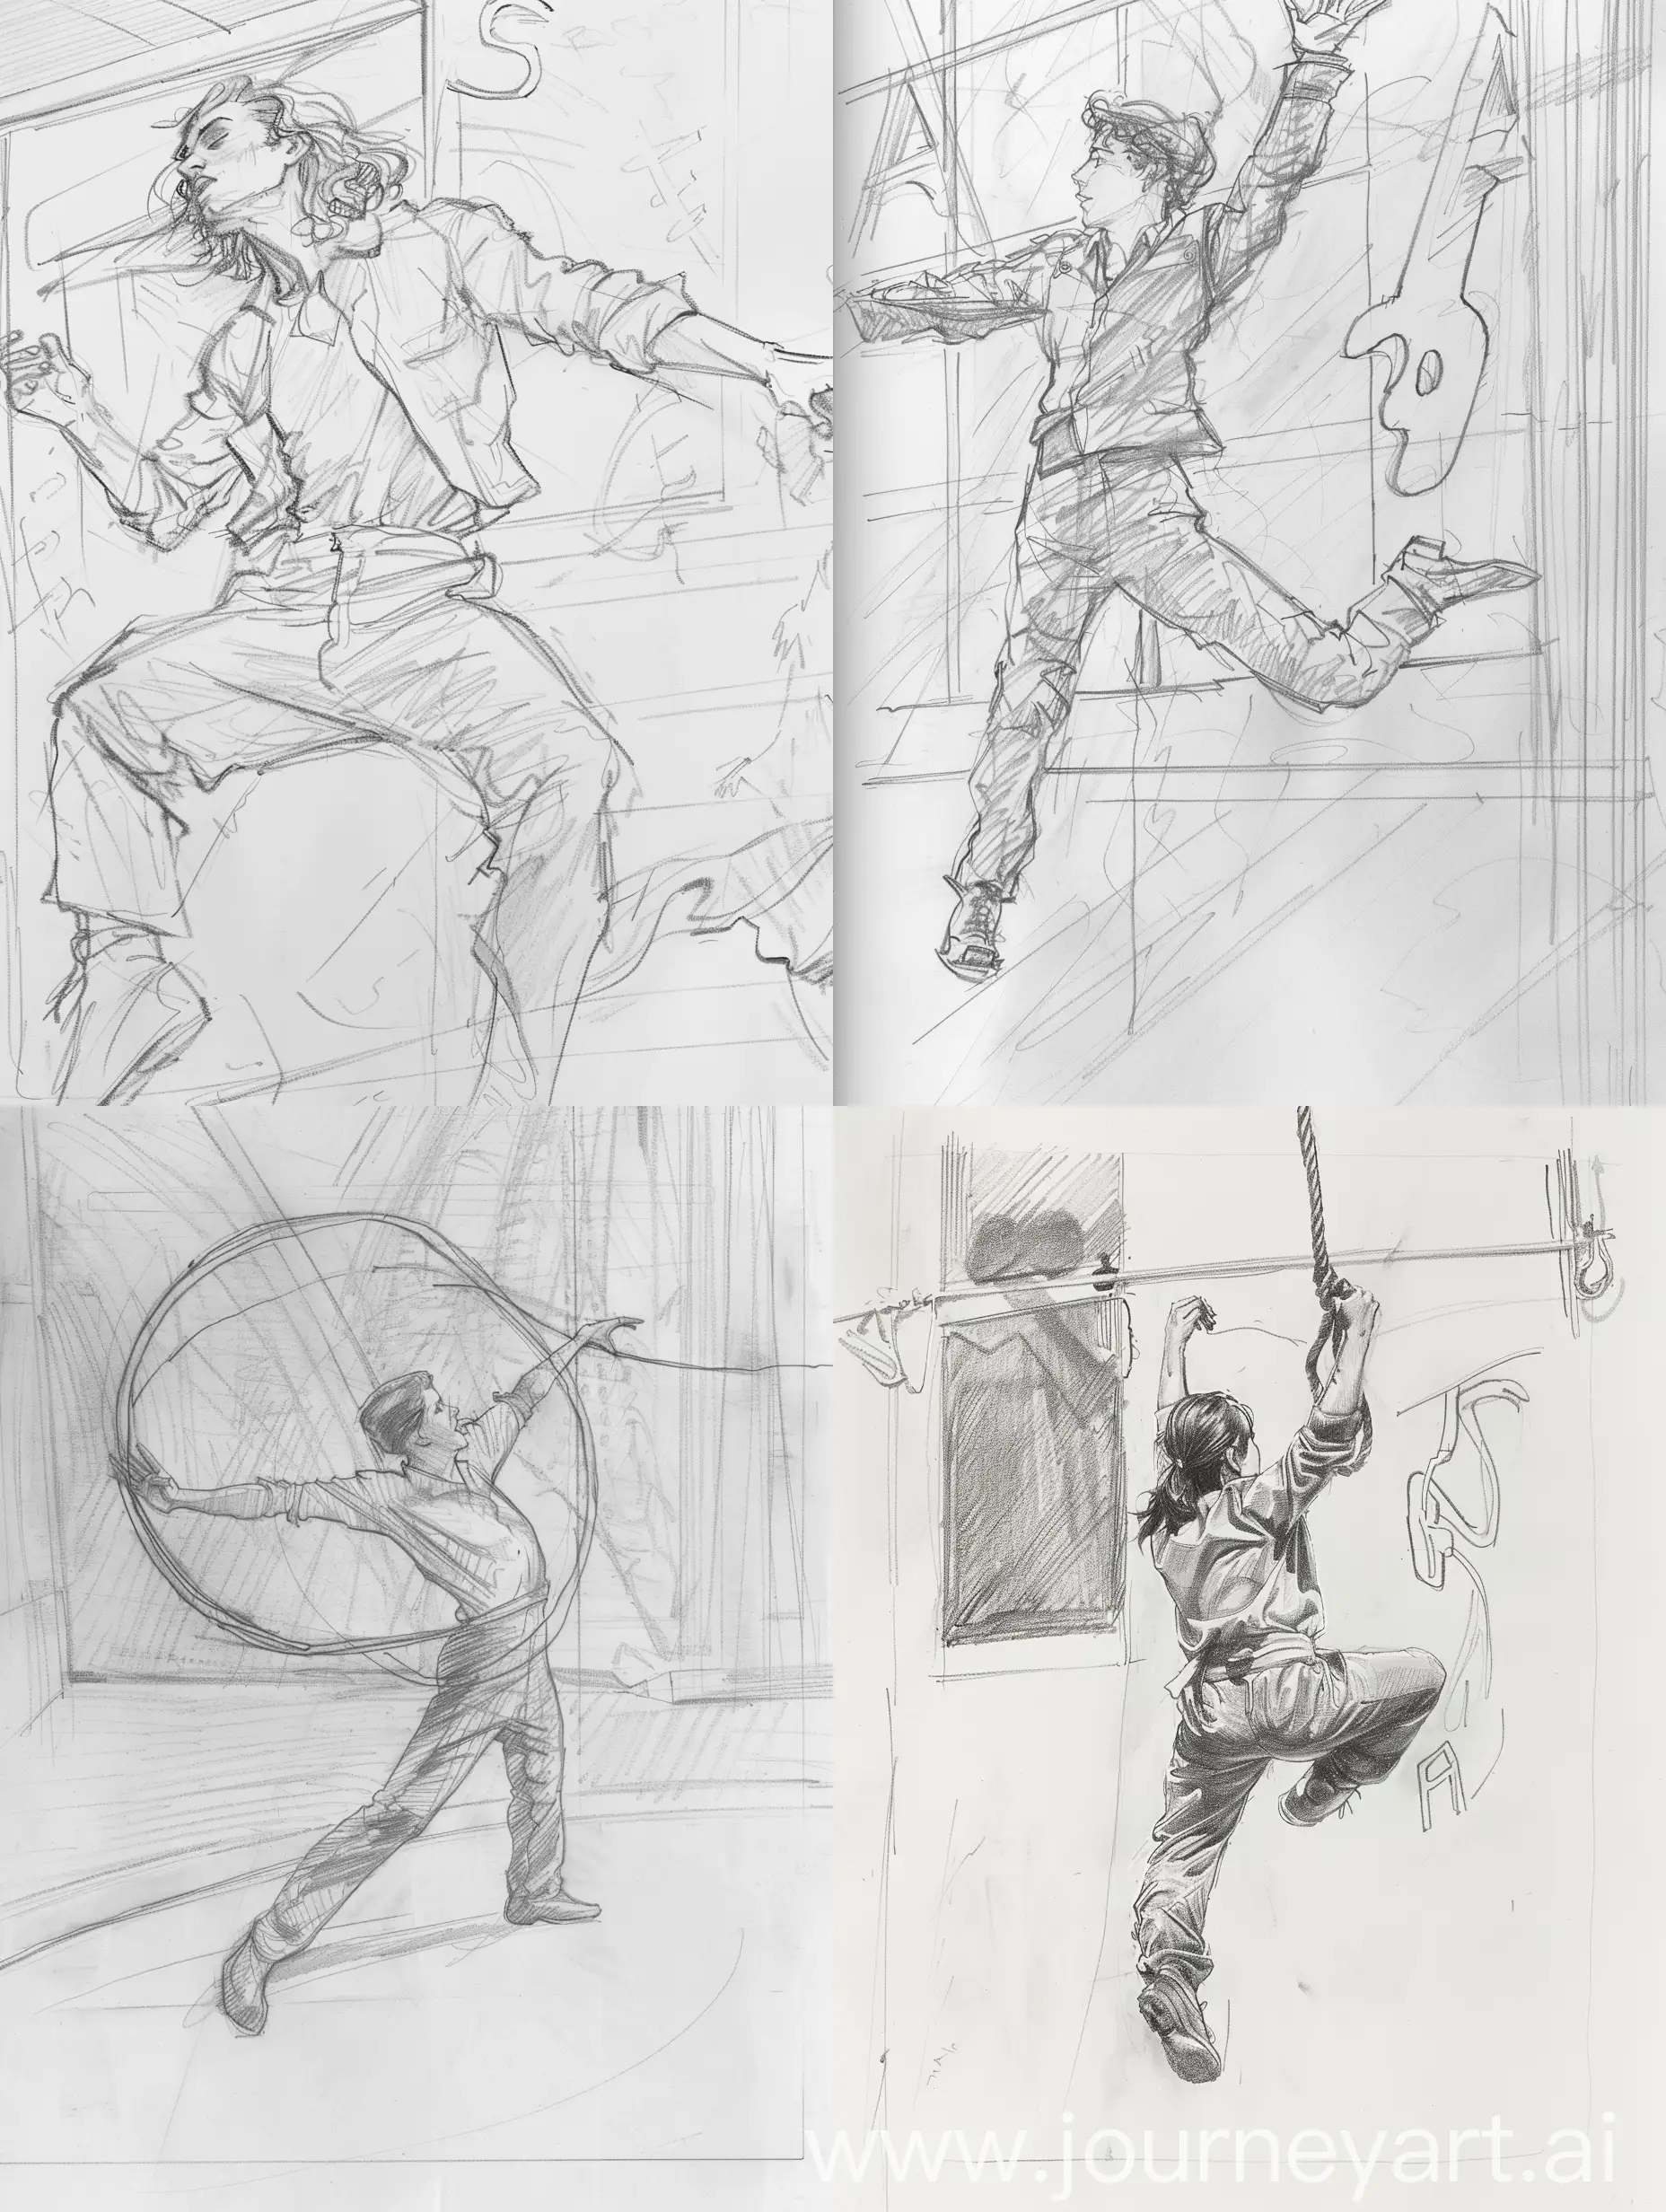 Dynamic-Circus-Performer-Sketch-in-Room-Setting